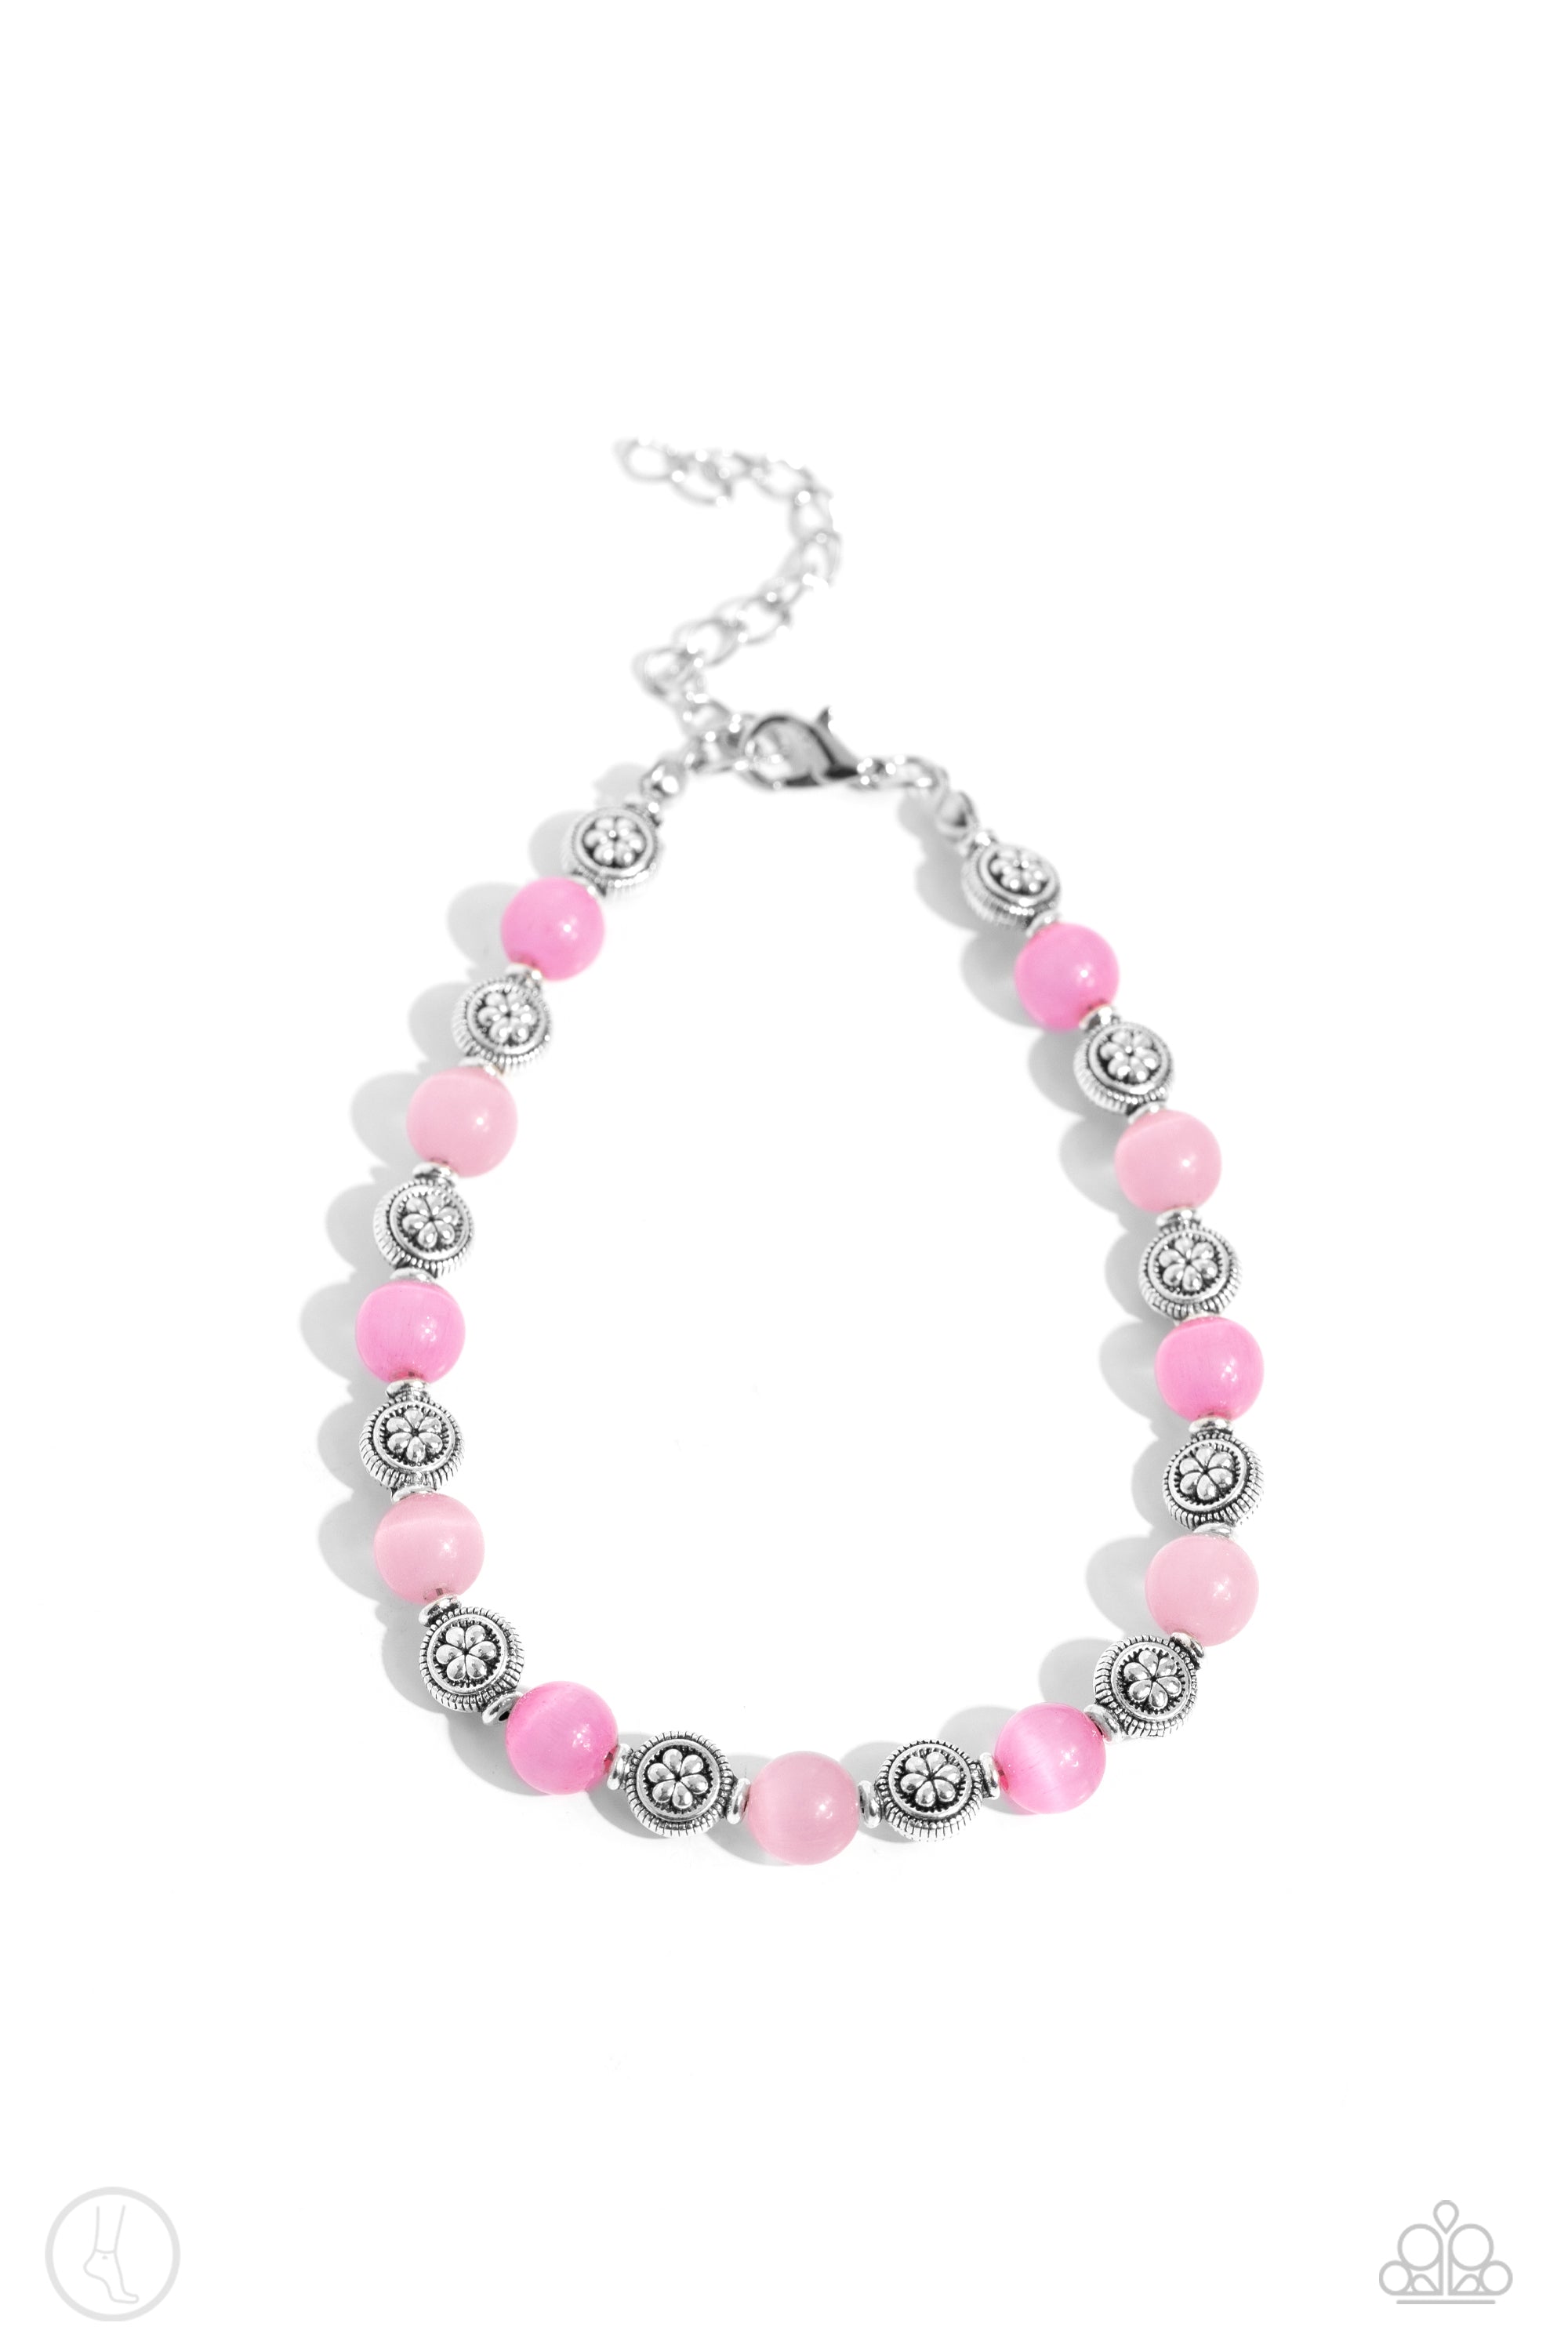 Beachy Bouquet Pink Cat's Eye Stone Anklet - Paparazzi Accessories- lightbox - CarasShop.com - $5 Jewelry by Cara Jewels